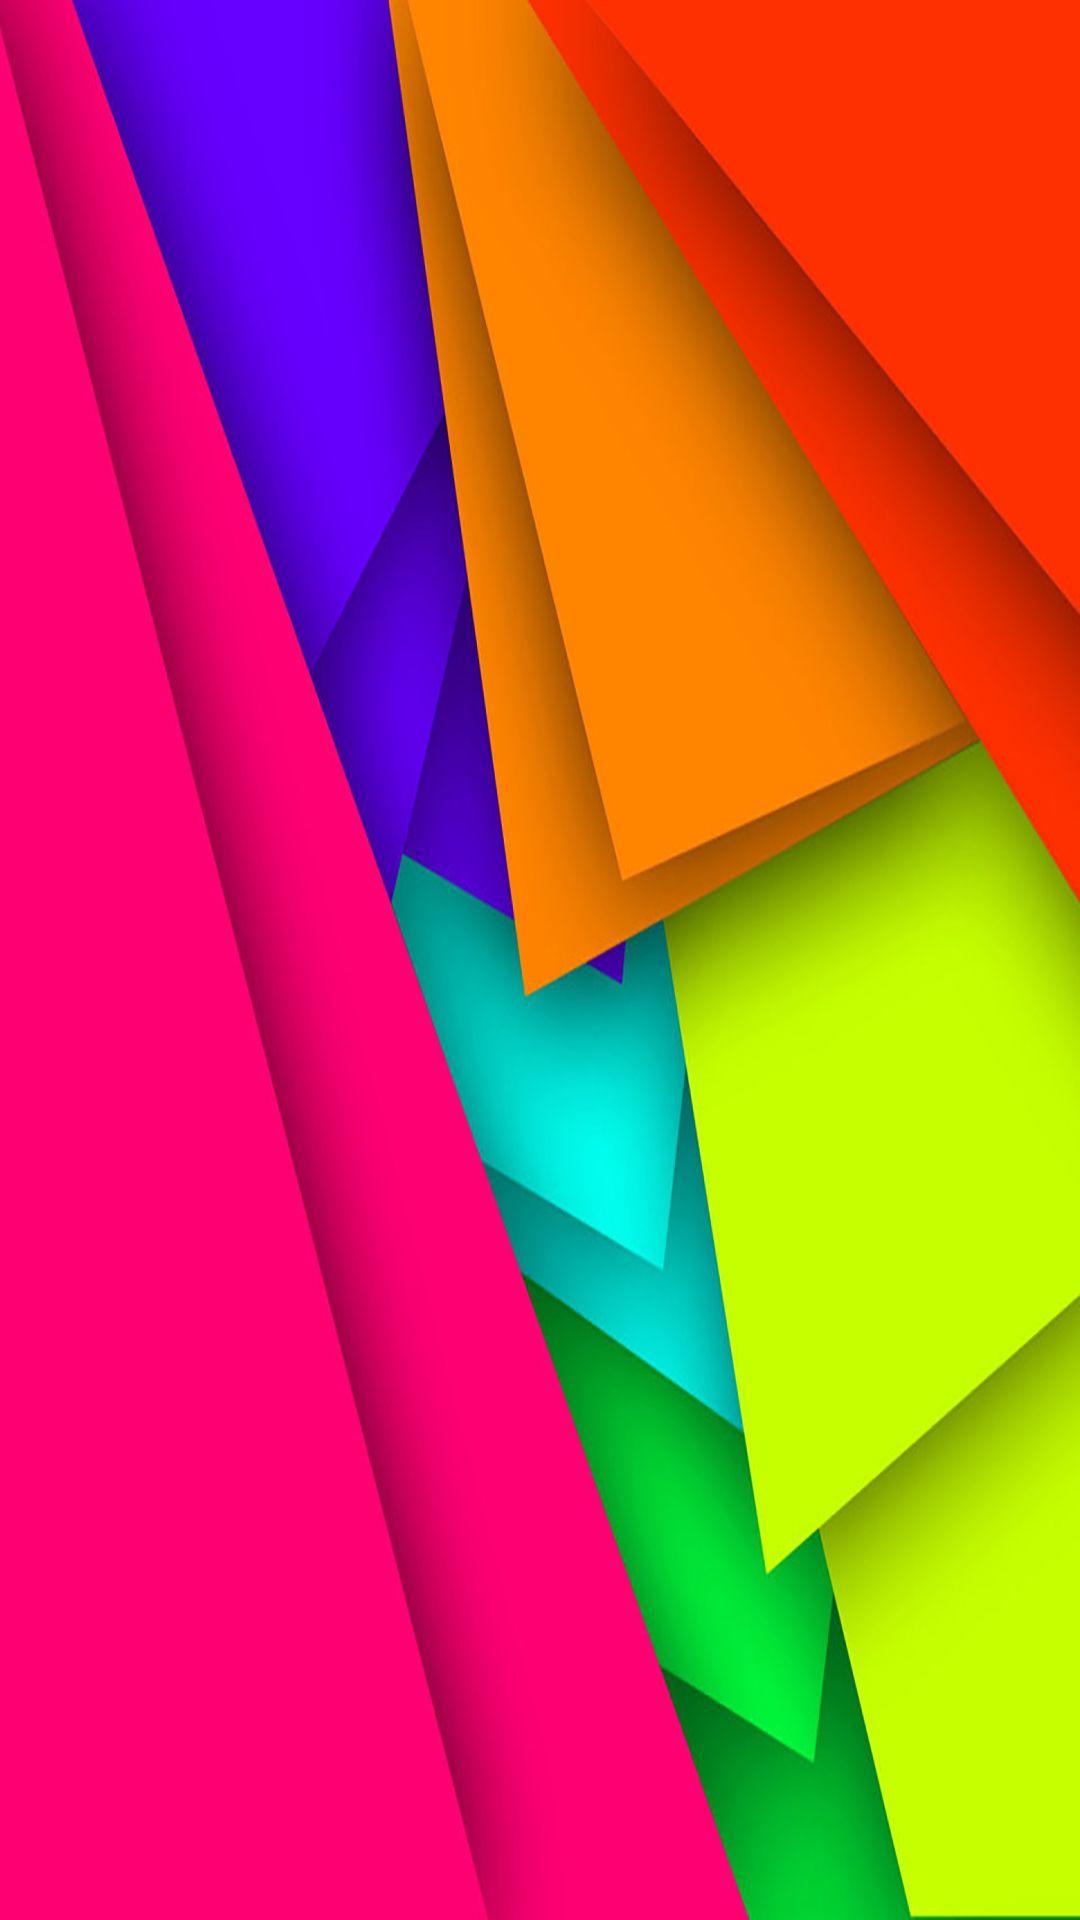 Bold Colorful Abstract Art Wallpaper. Geometric